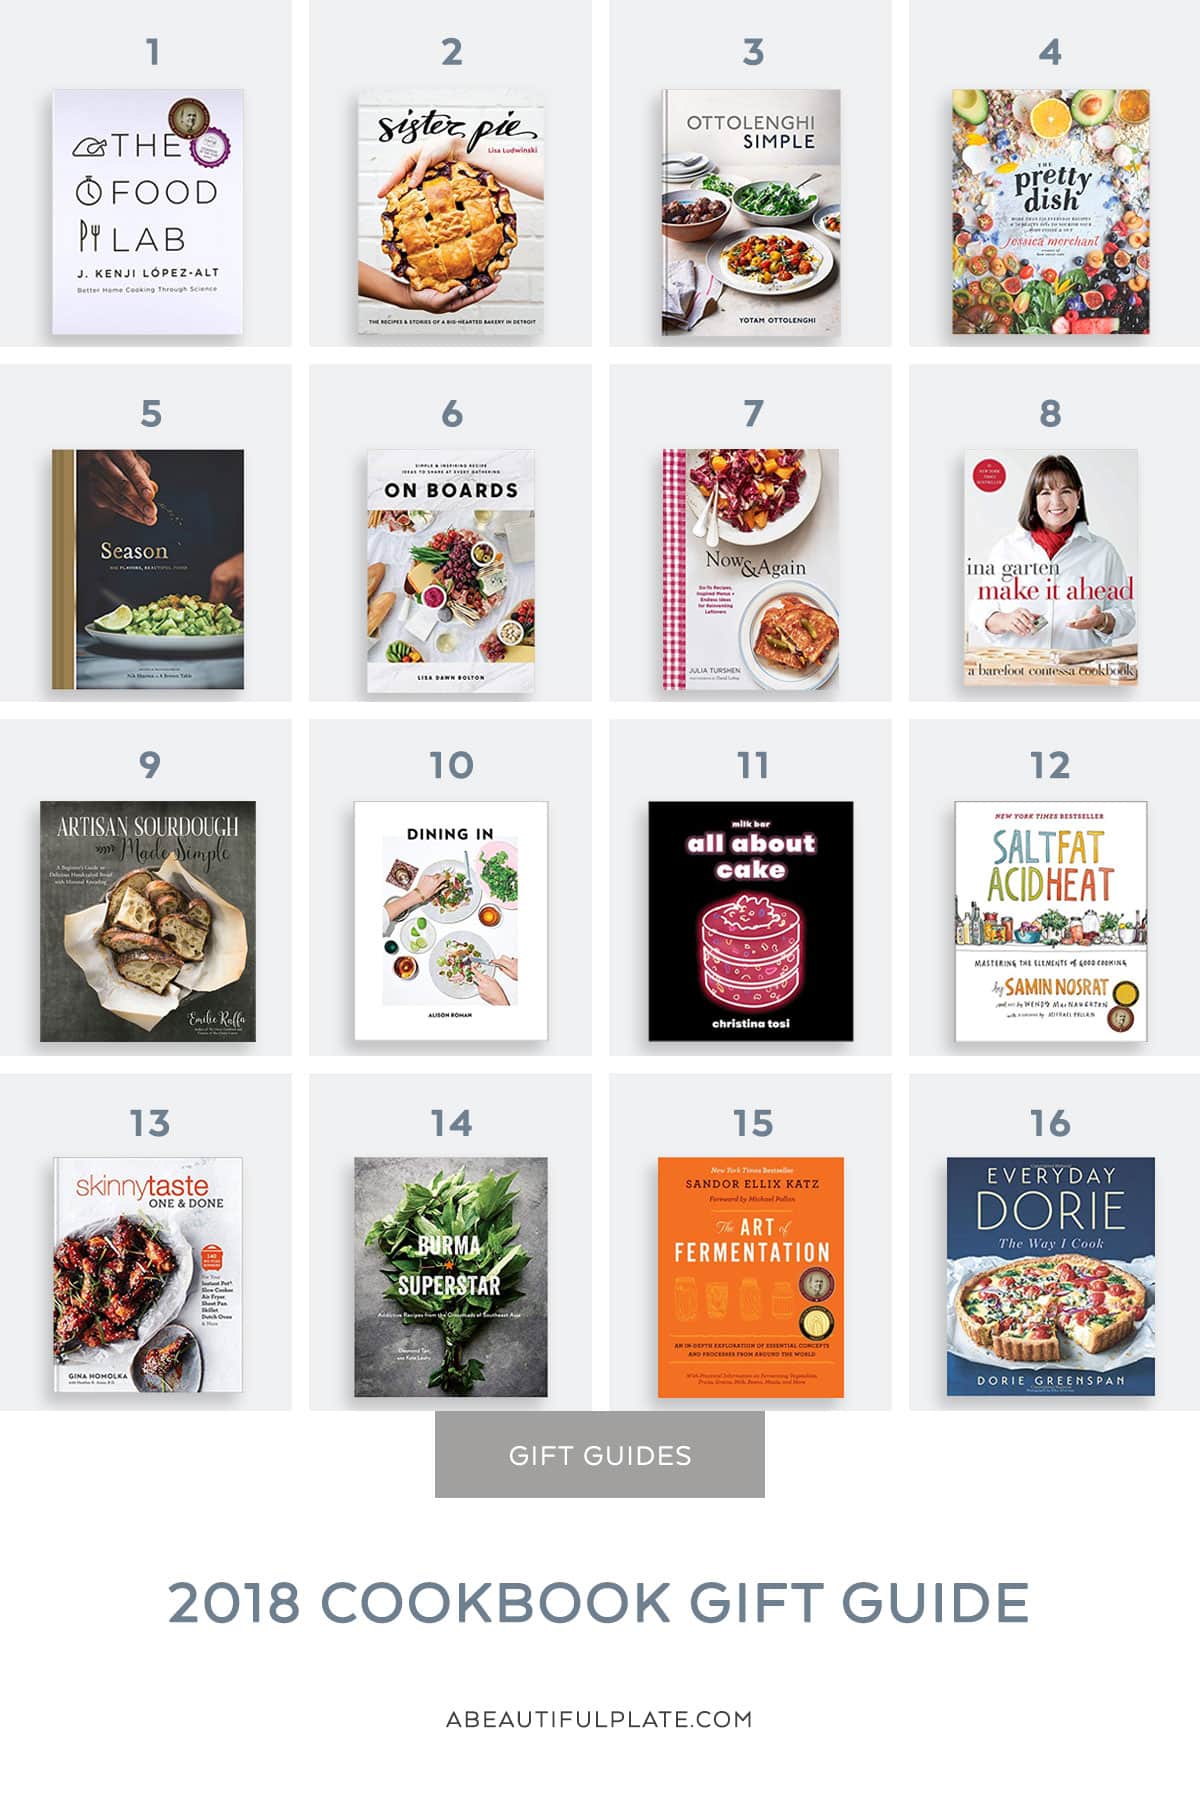 Christmas 2023 Gift Guide: 12 best cookbooks to give this year